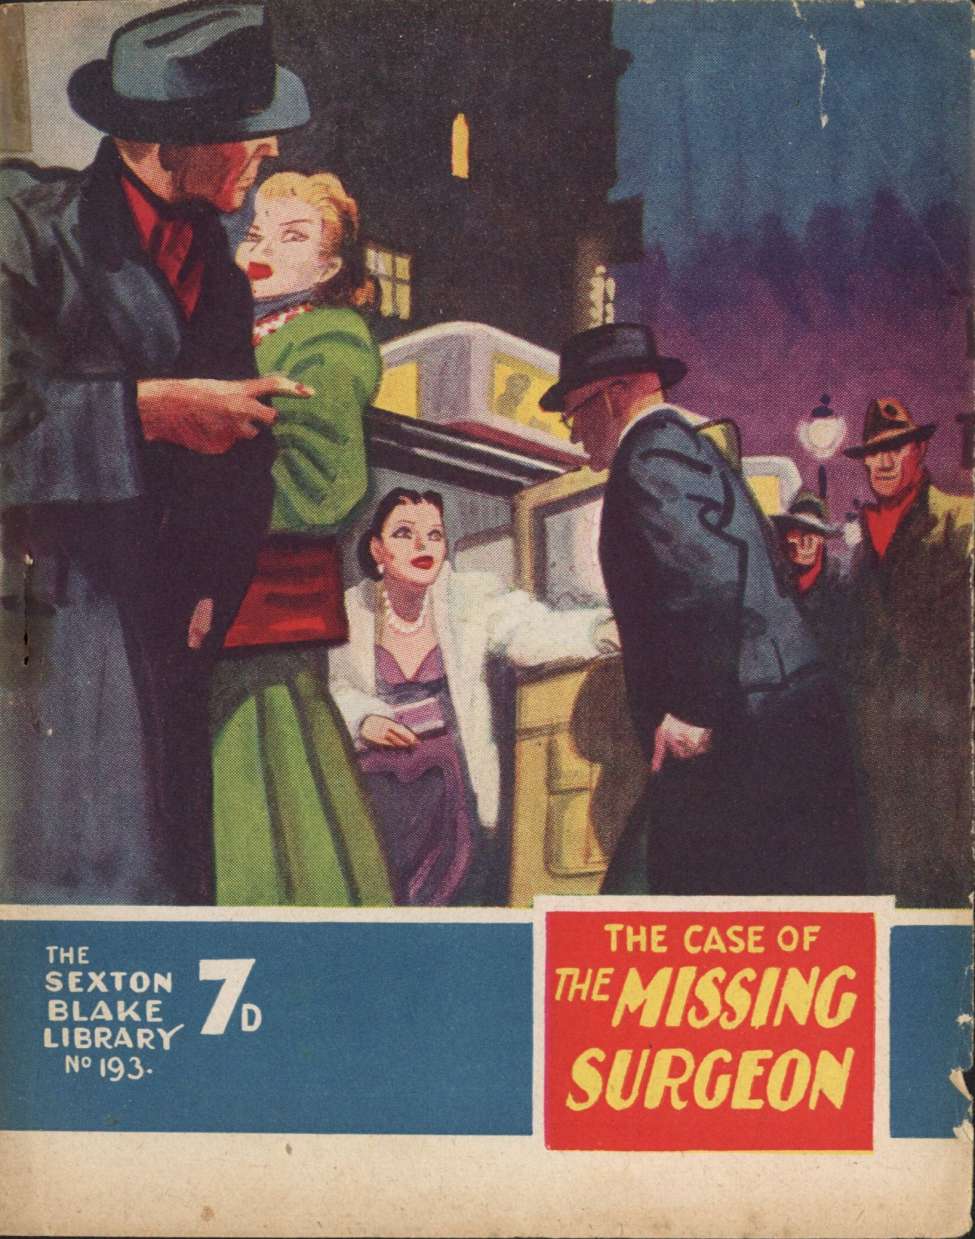 Book Cover For Sexton Blake Library S3 193 - The Case of the Missing Surgeon